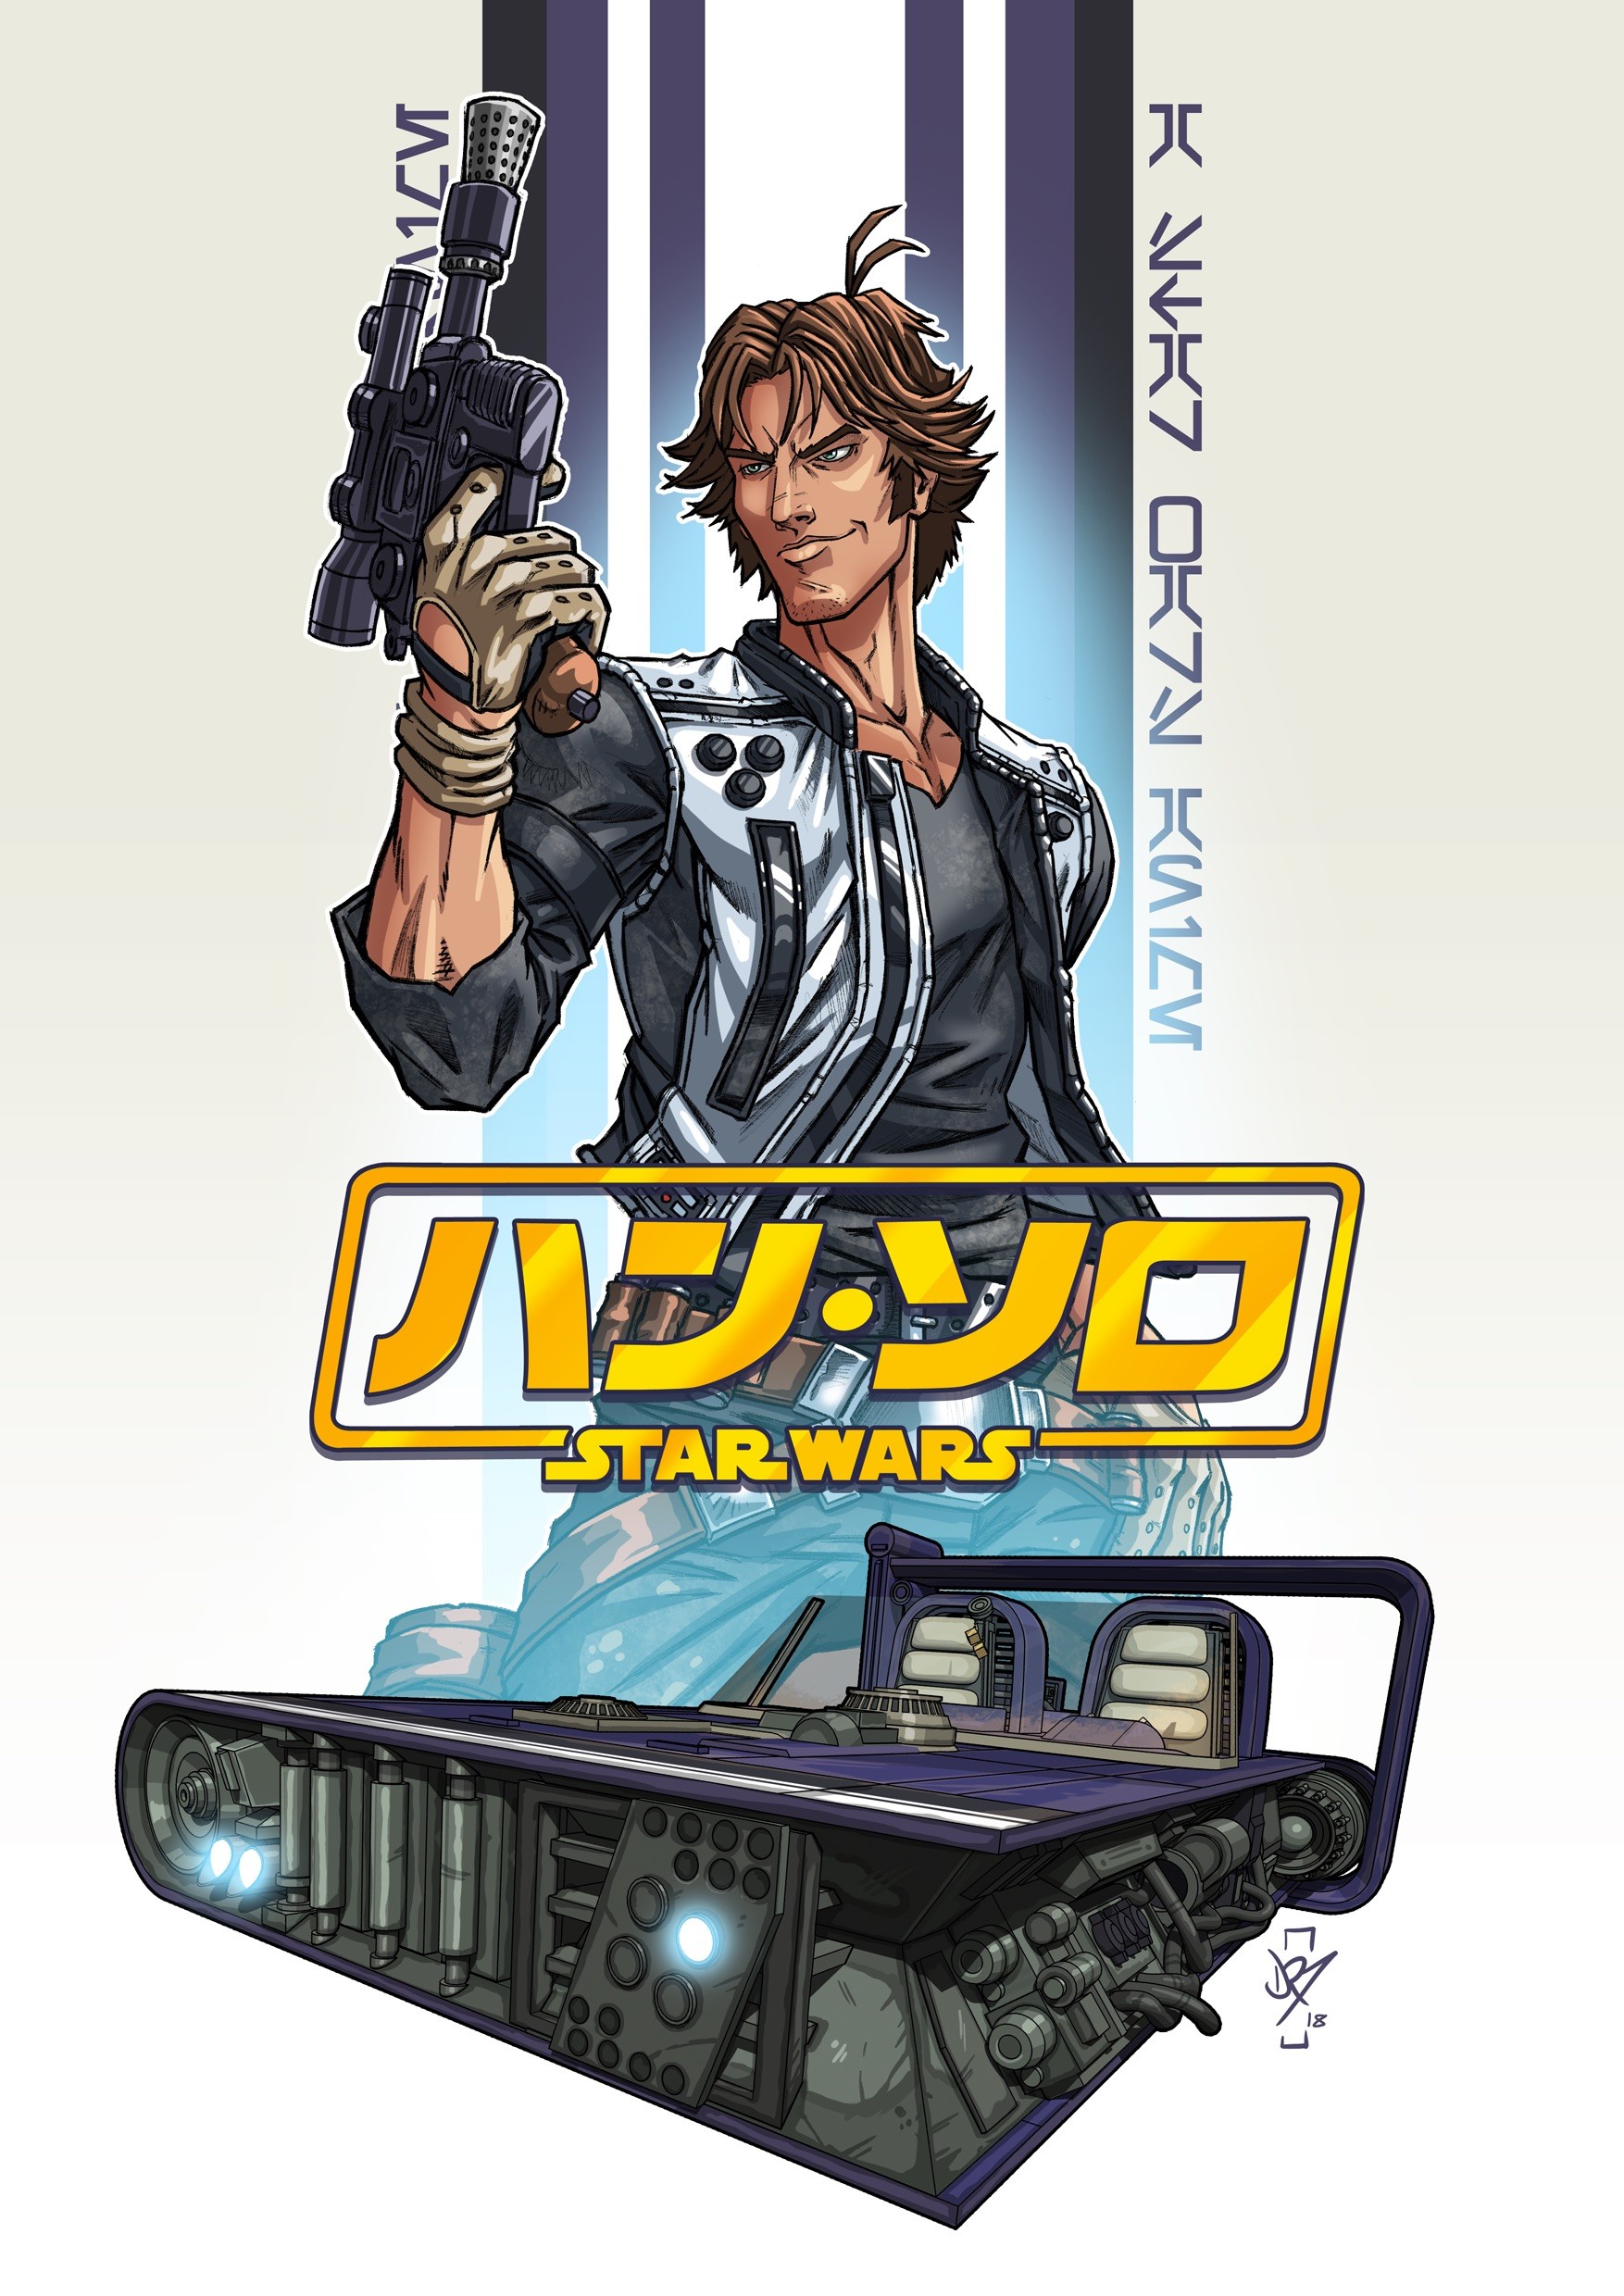 Star Wars Anthology To Be Created By Japanese Anime Studios